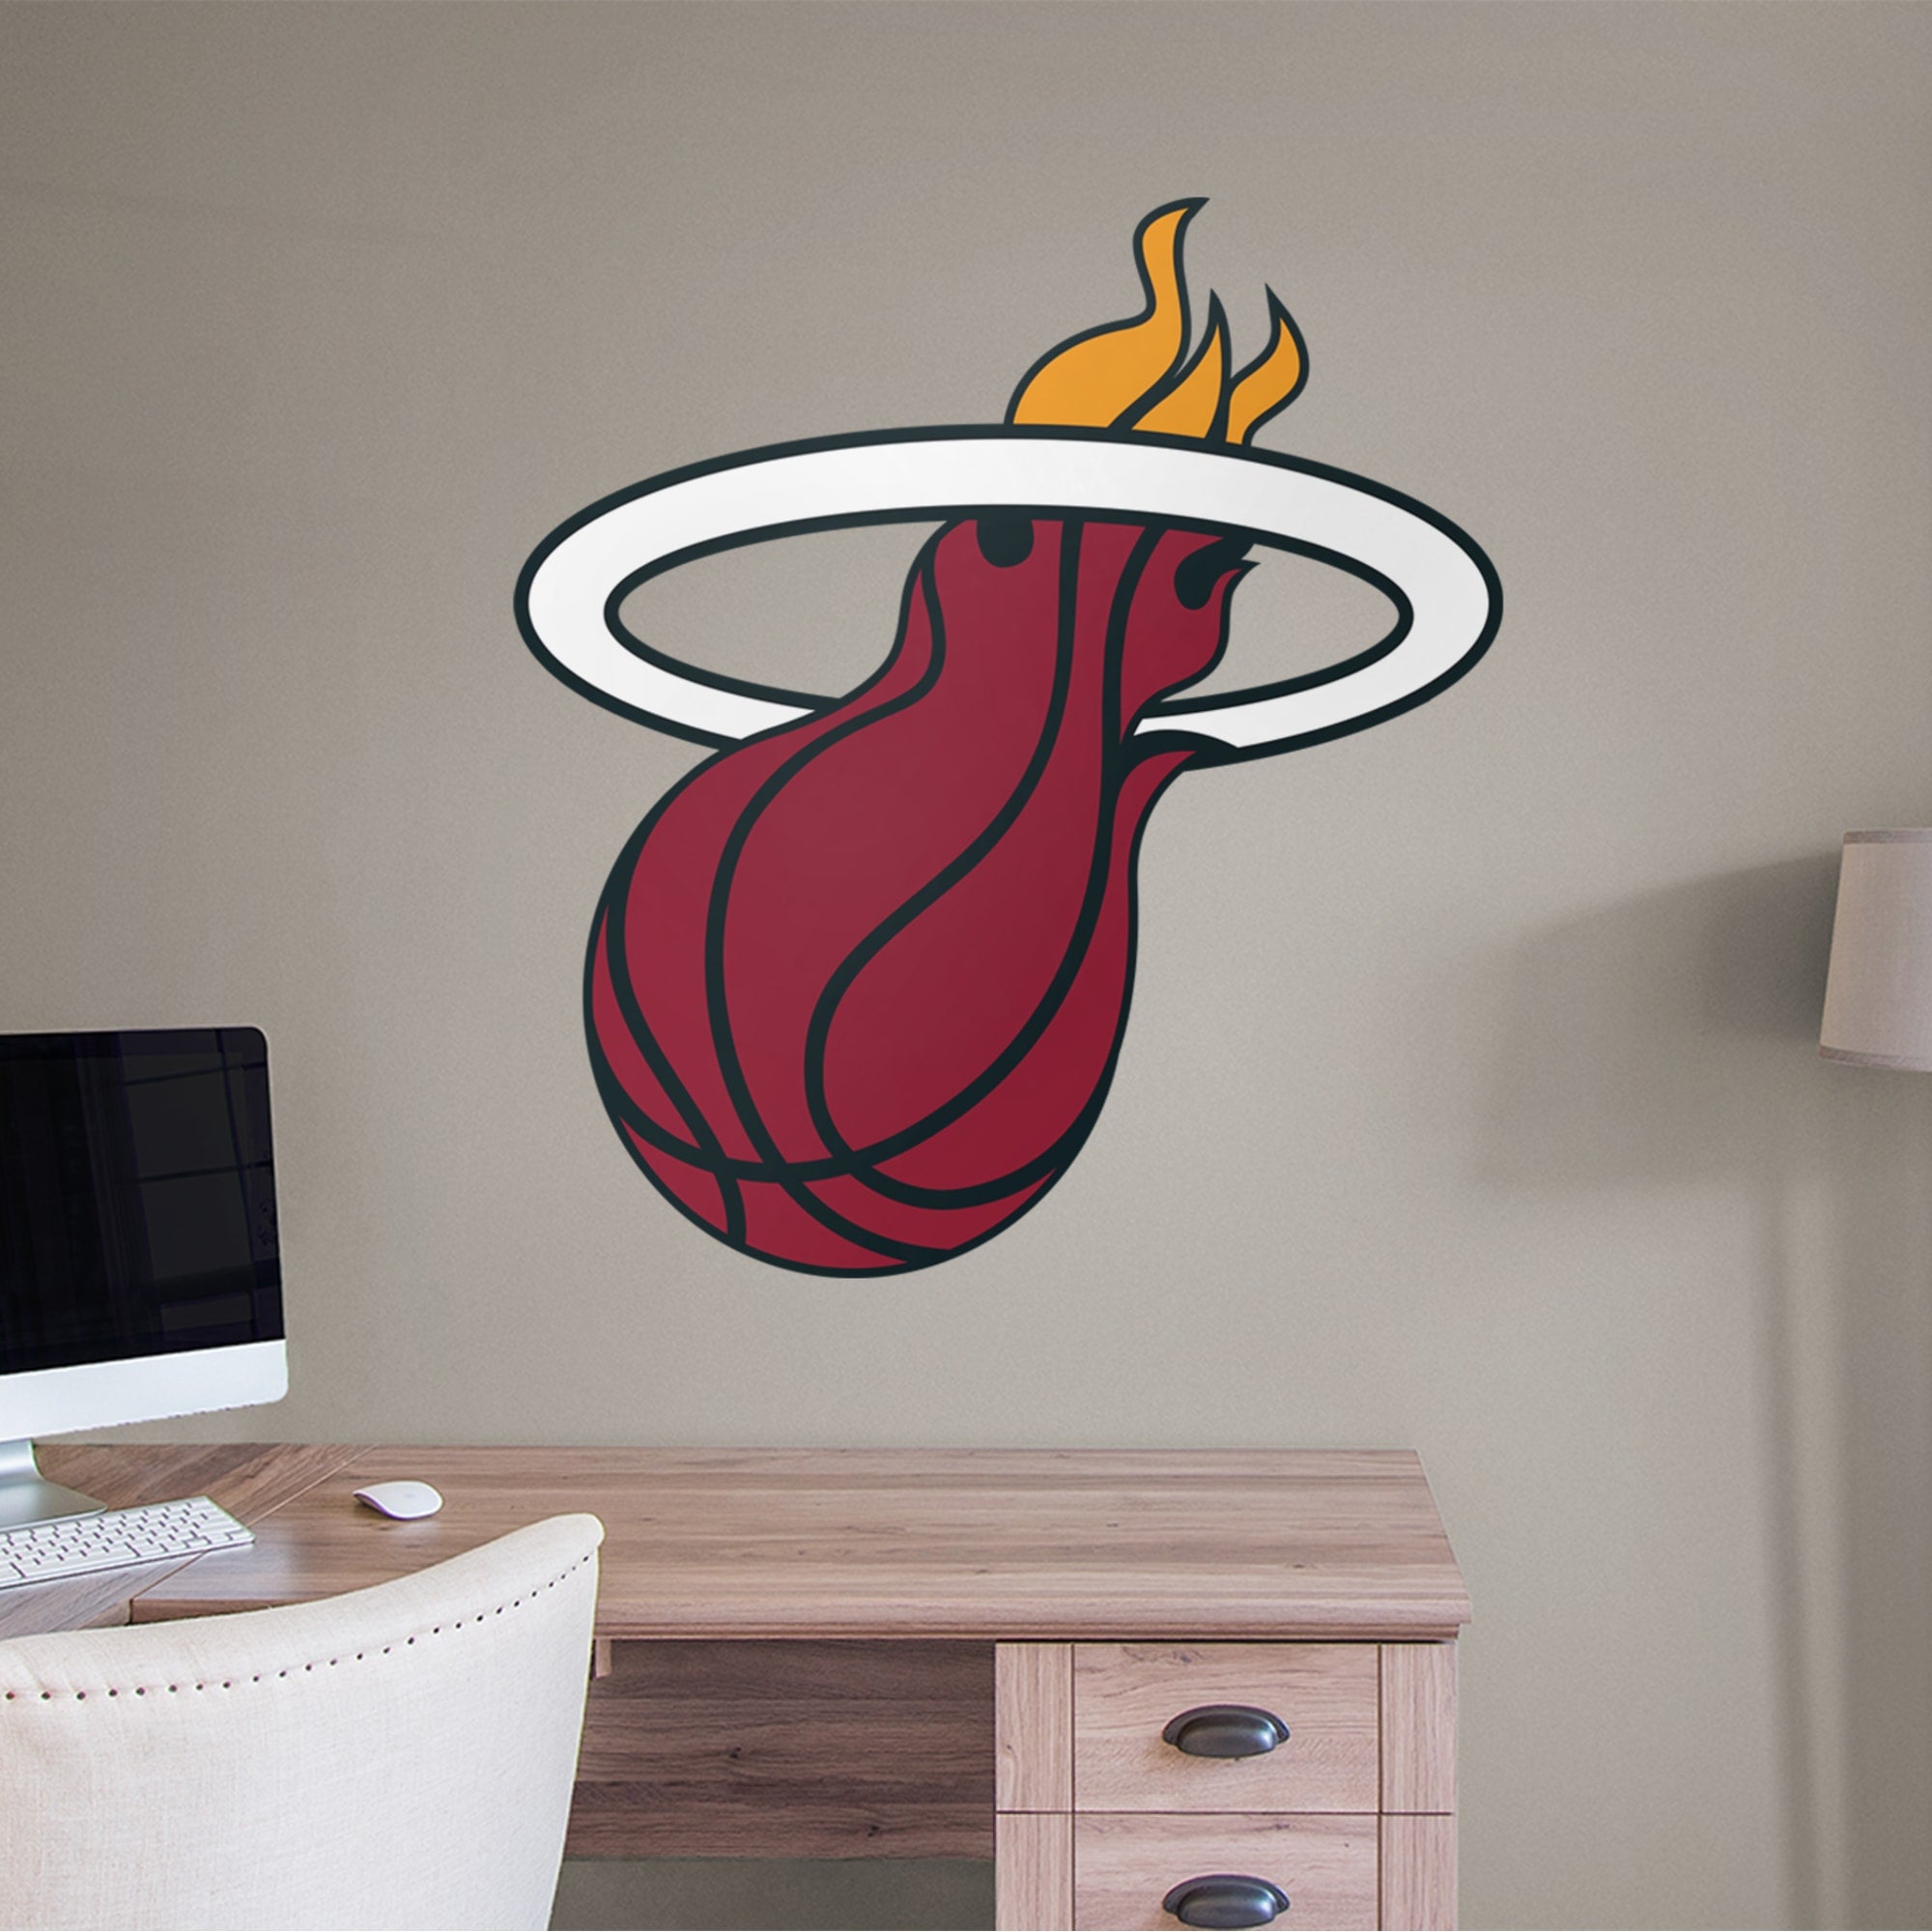 Miami Heat: Logo - Officially Licensed NBA Removable Wall Decal Giant Logo (38"W x 42"H) by Fathead | Vinyl